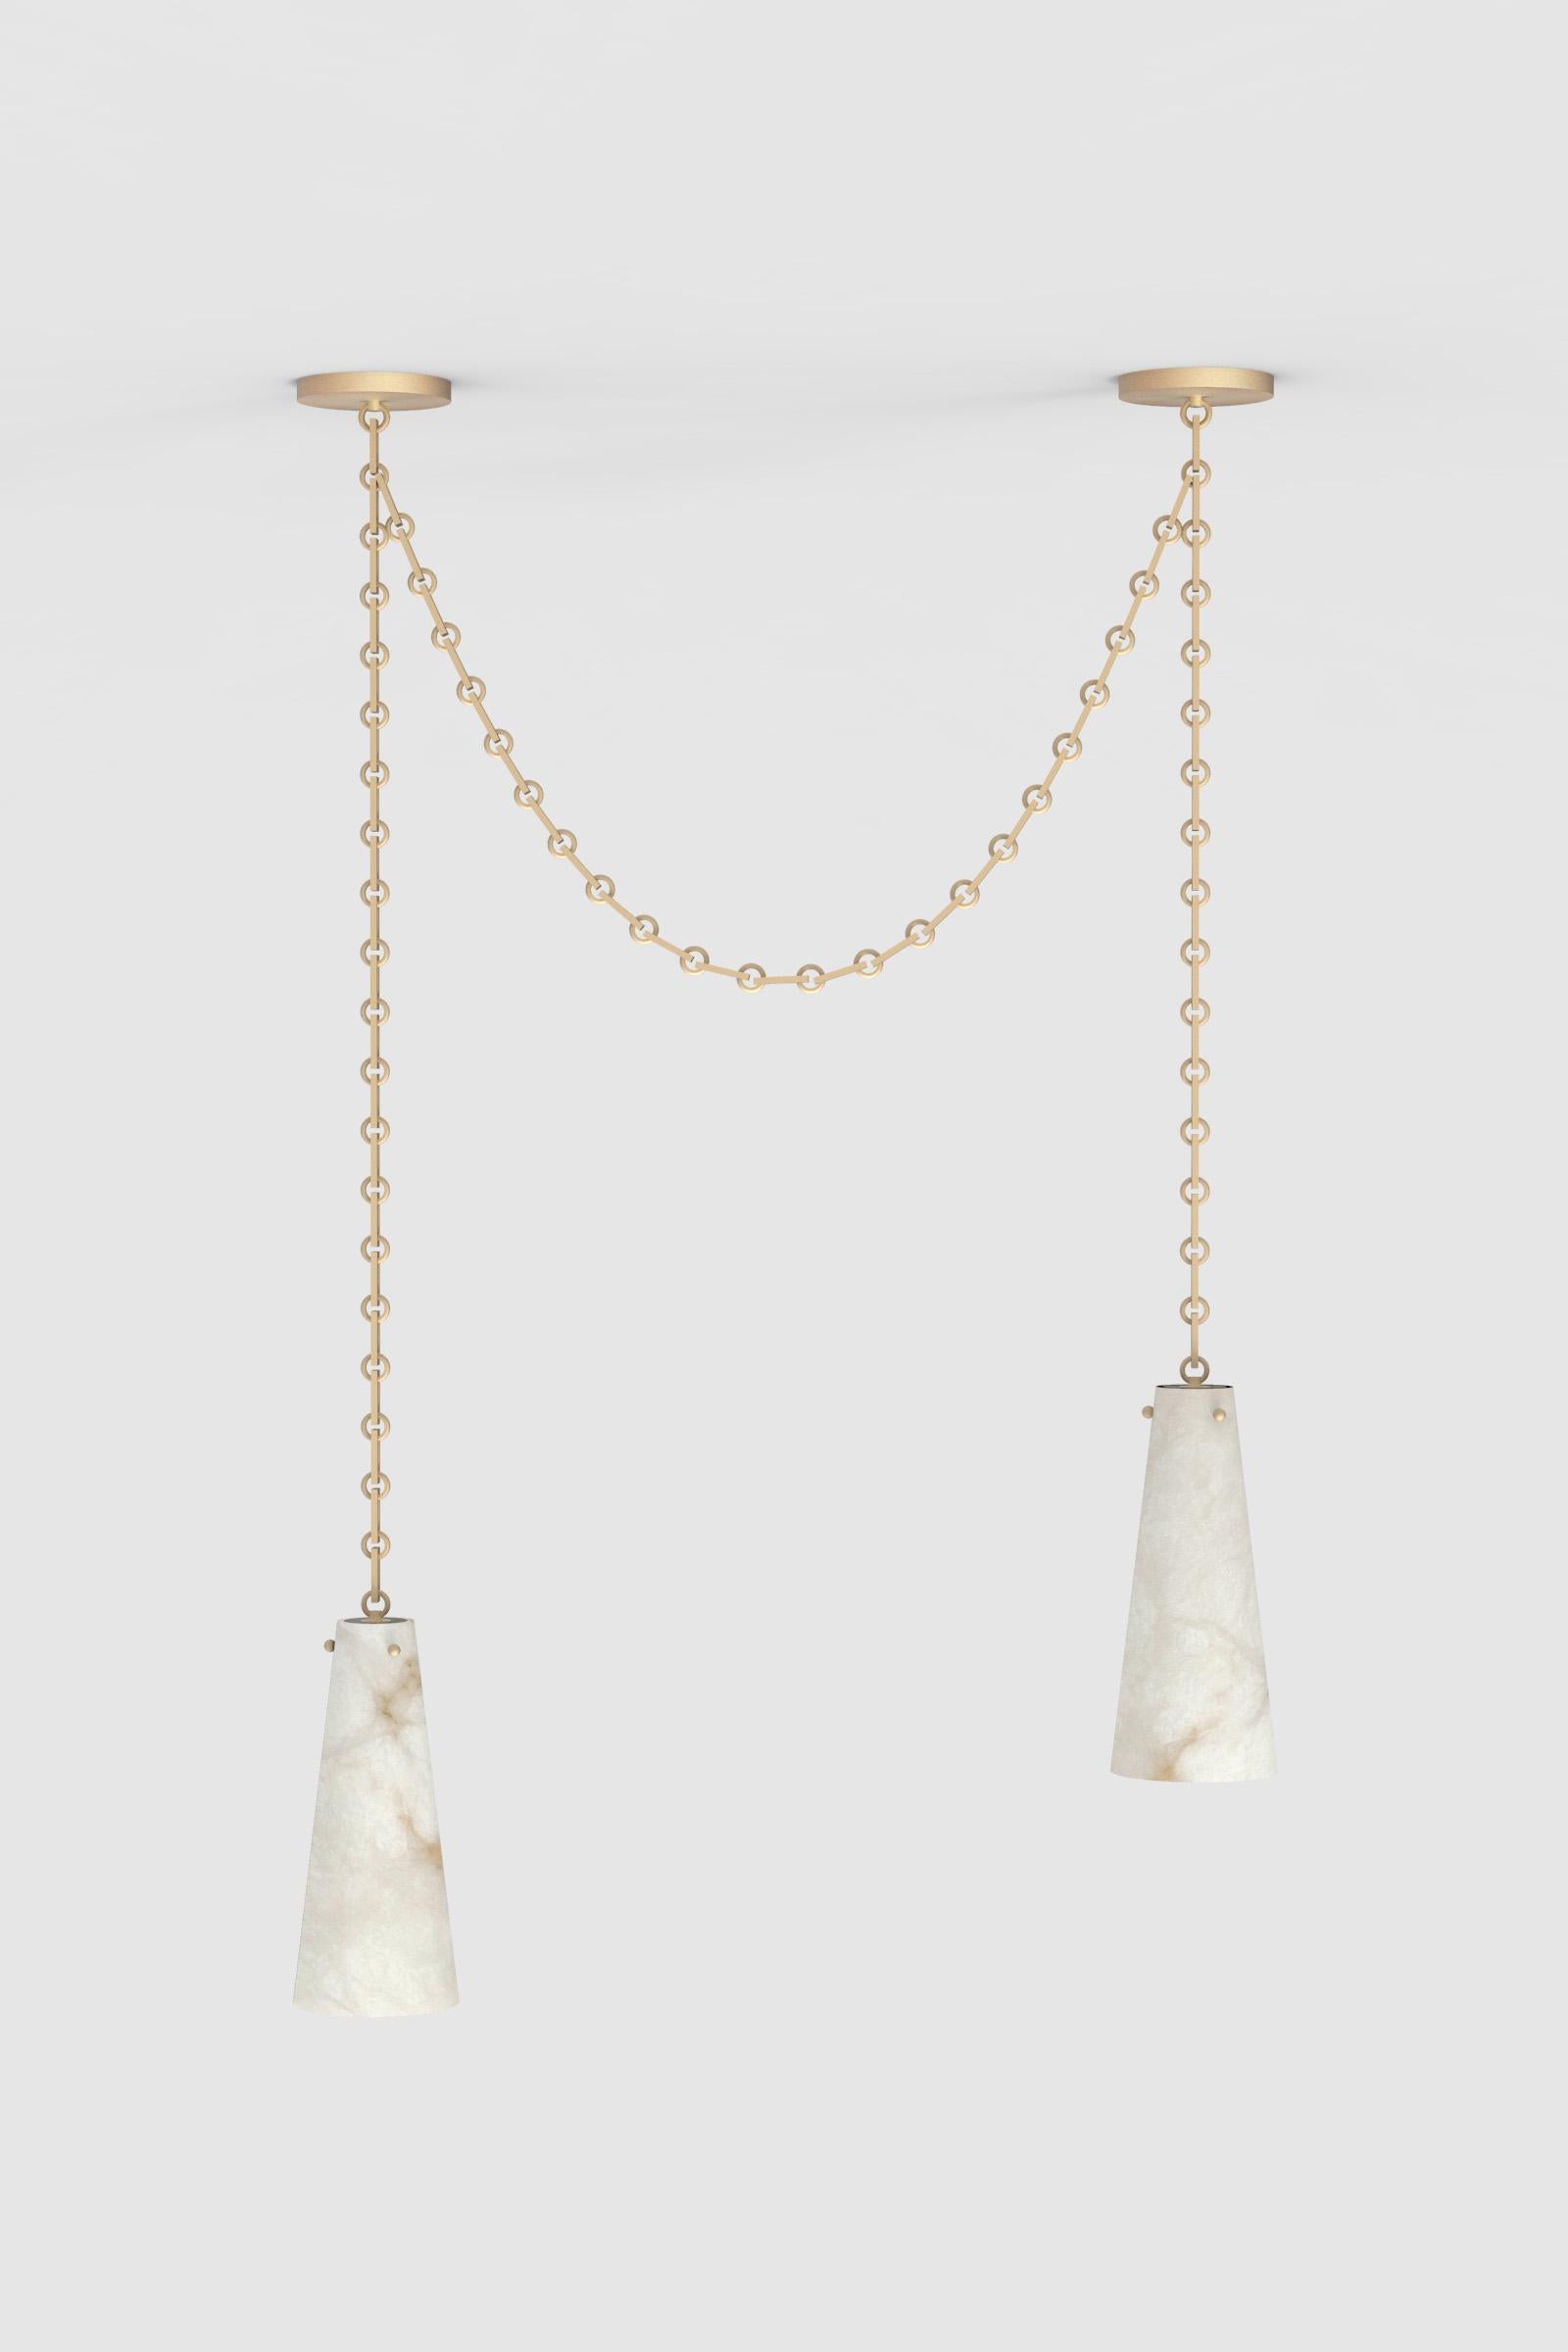 Orphan Work 202A-1S Double Pendant BB, 2021
Shown in alabaster with brushed brass
Available in brushed brass and blackened brass
Measures: 15” H x 6 1/2” W 
height and width to order*
canopy 6